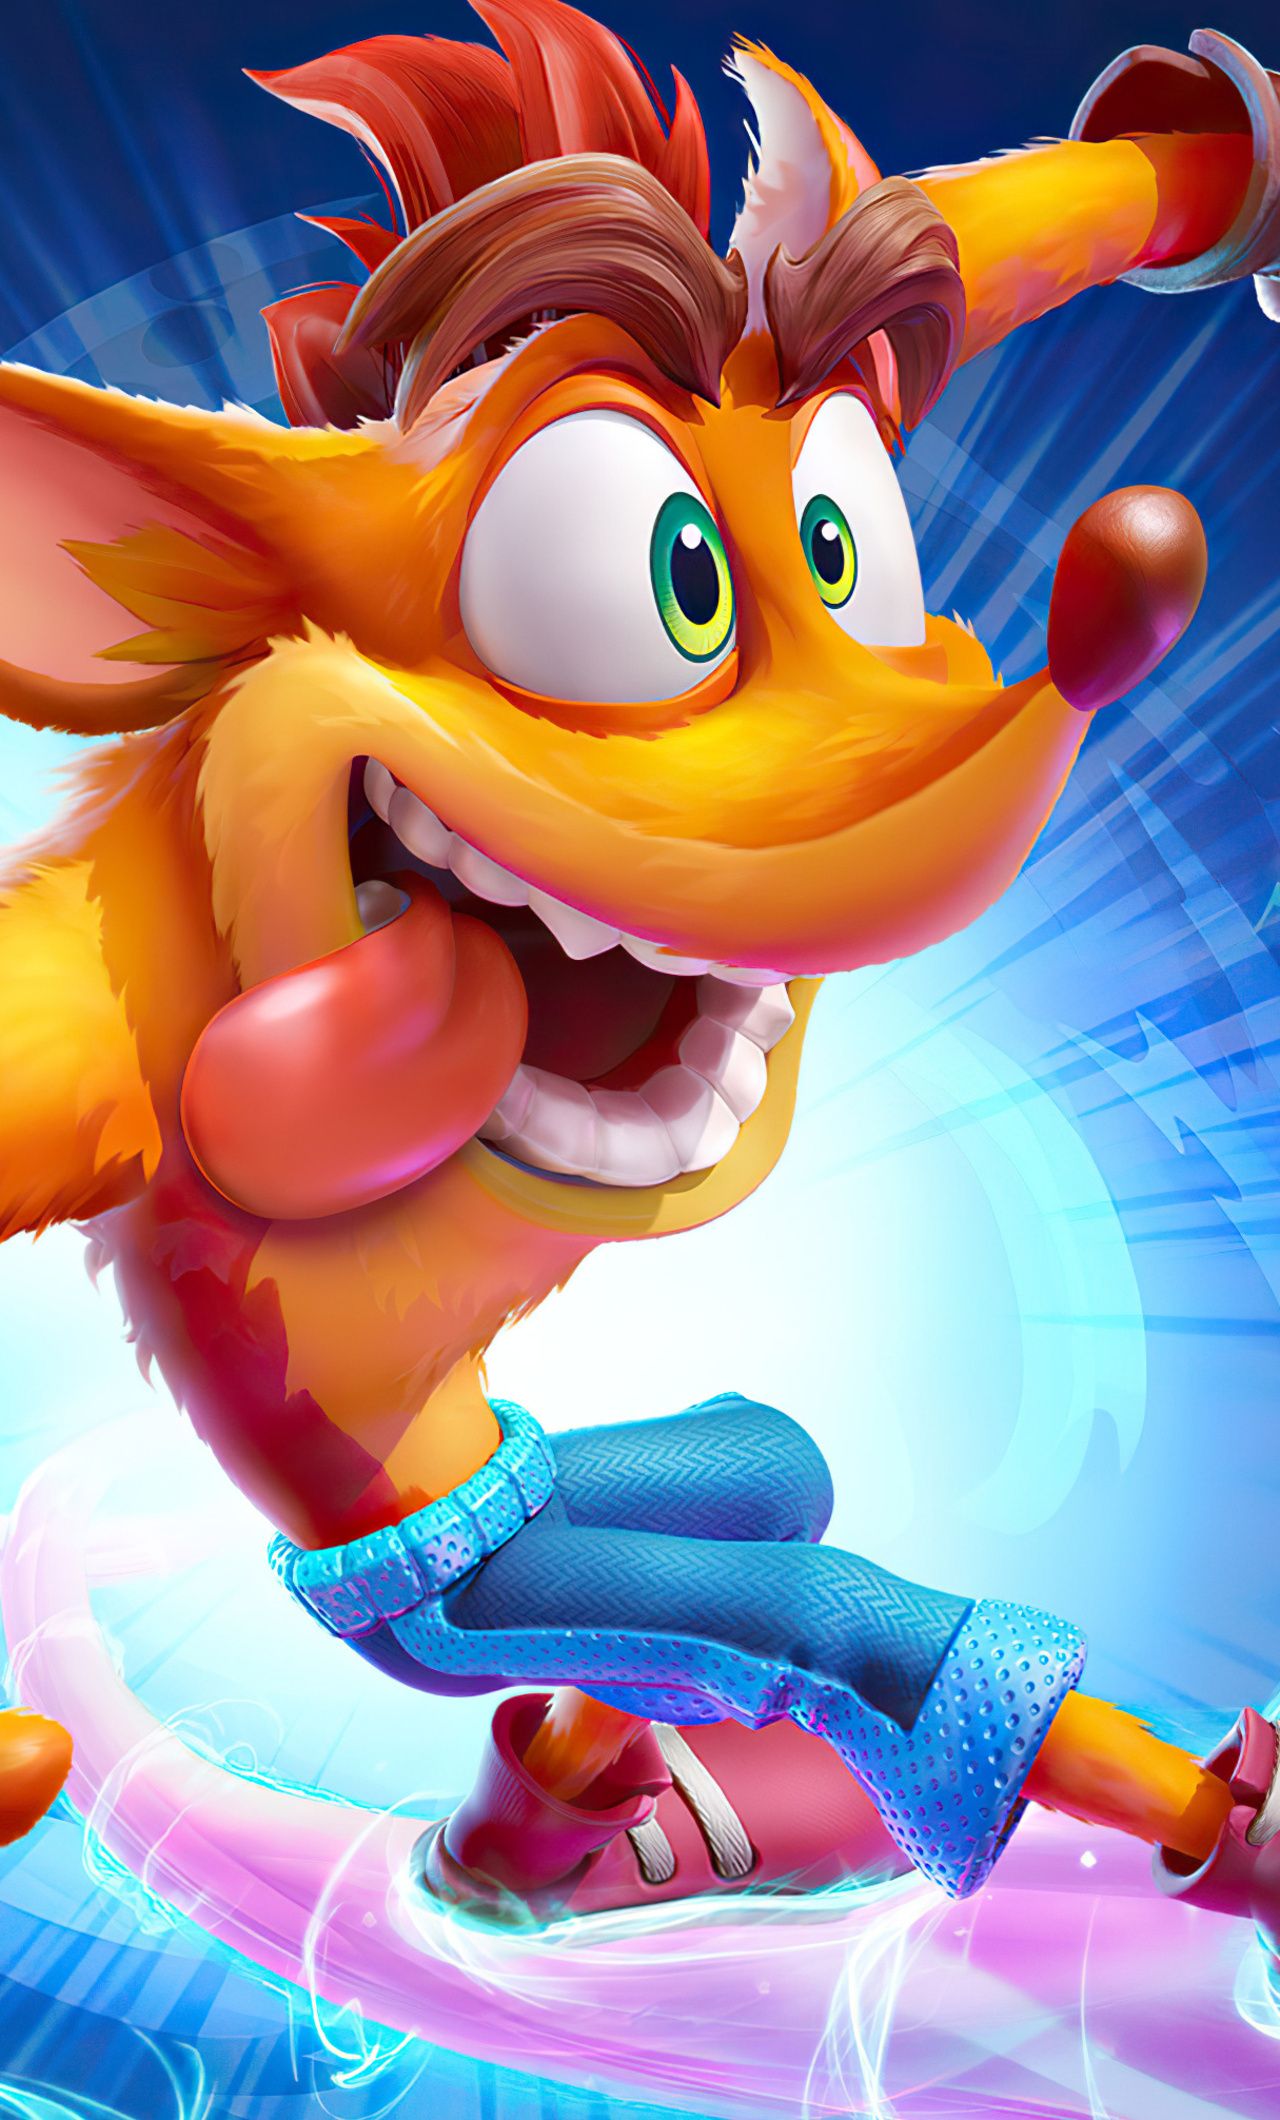 Crash Bandicoot 4 Its About Time iPhone HD 4k Wallpaper, Image, Background, Photo and Picture